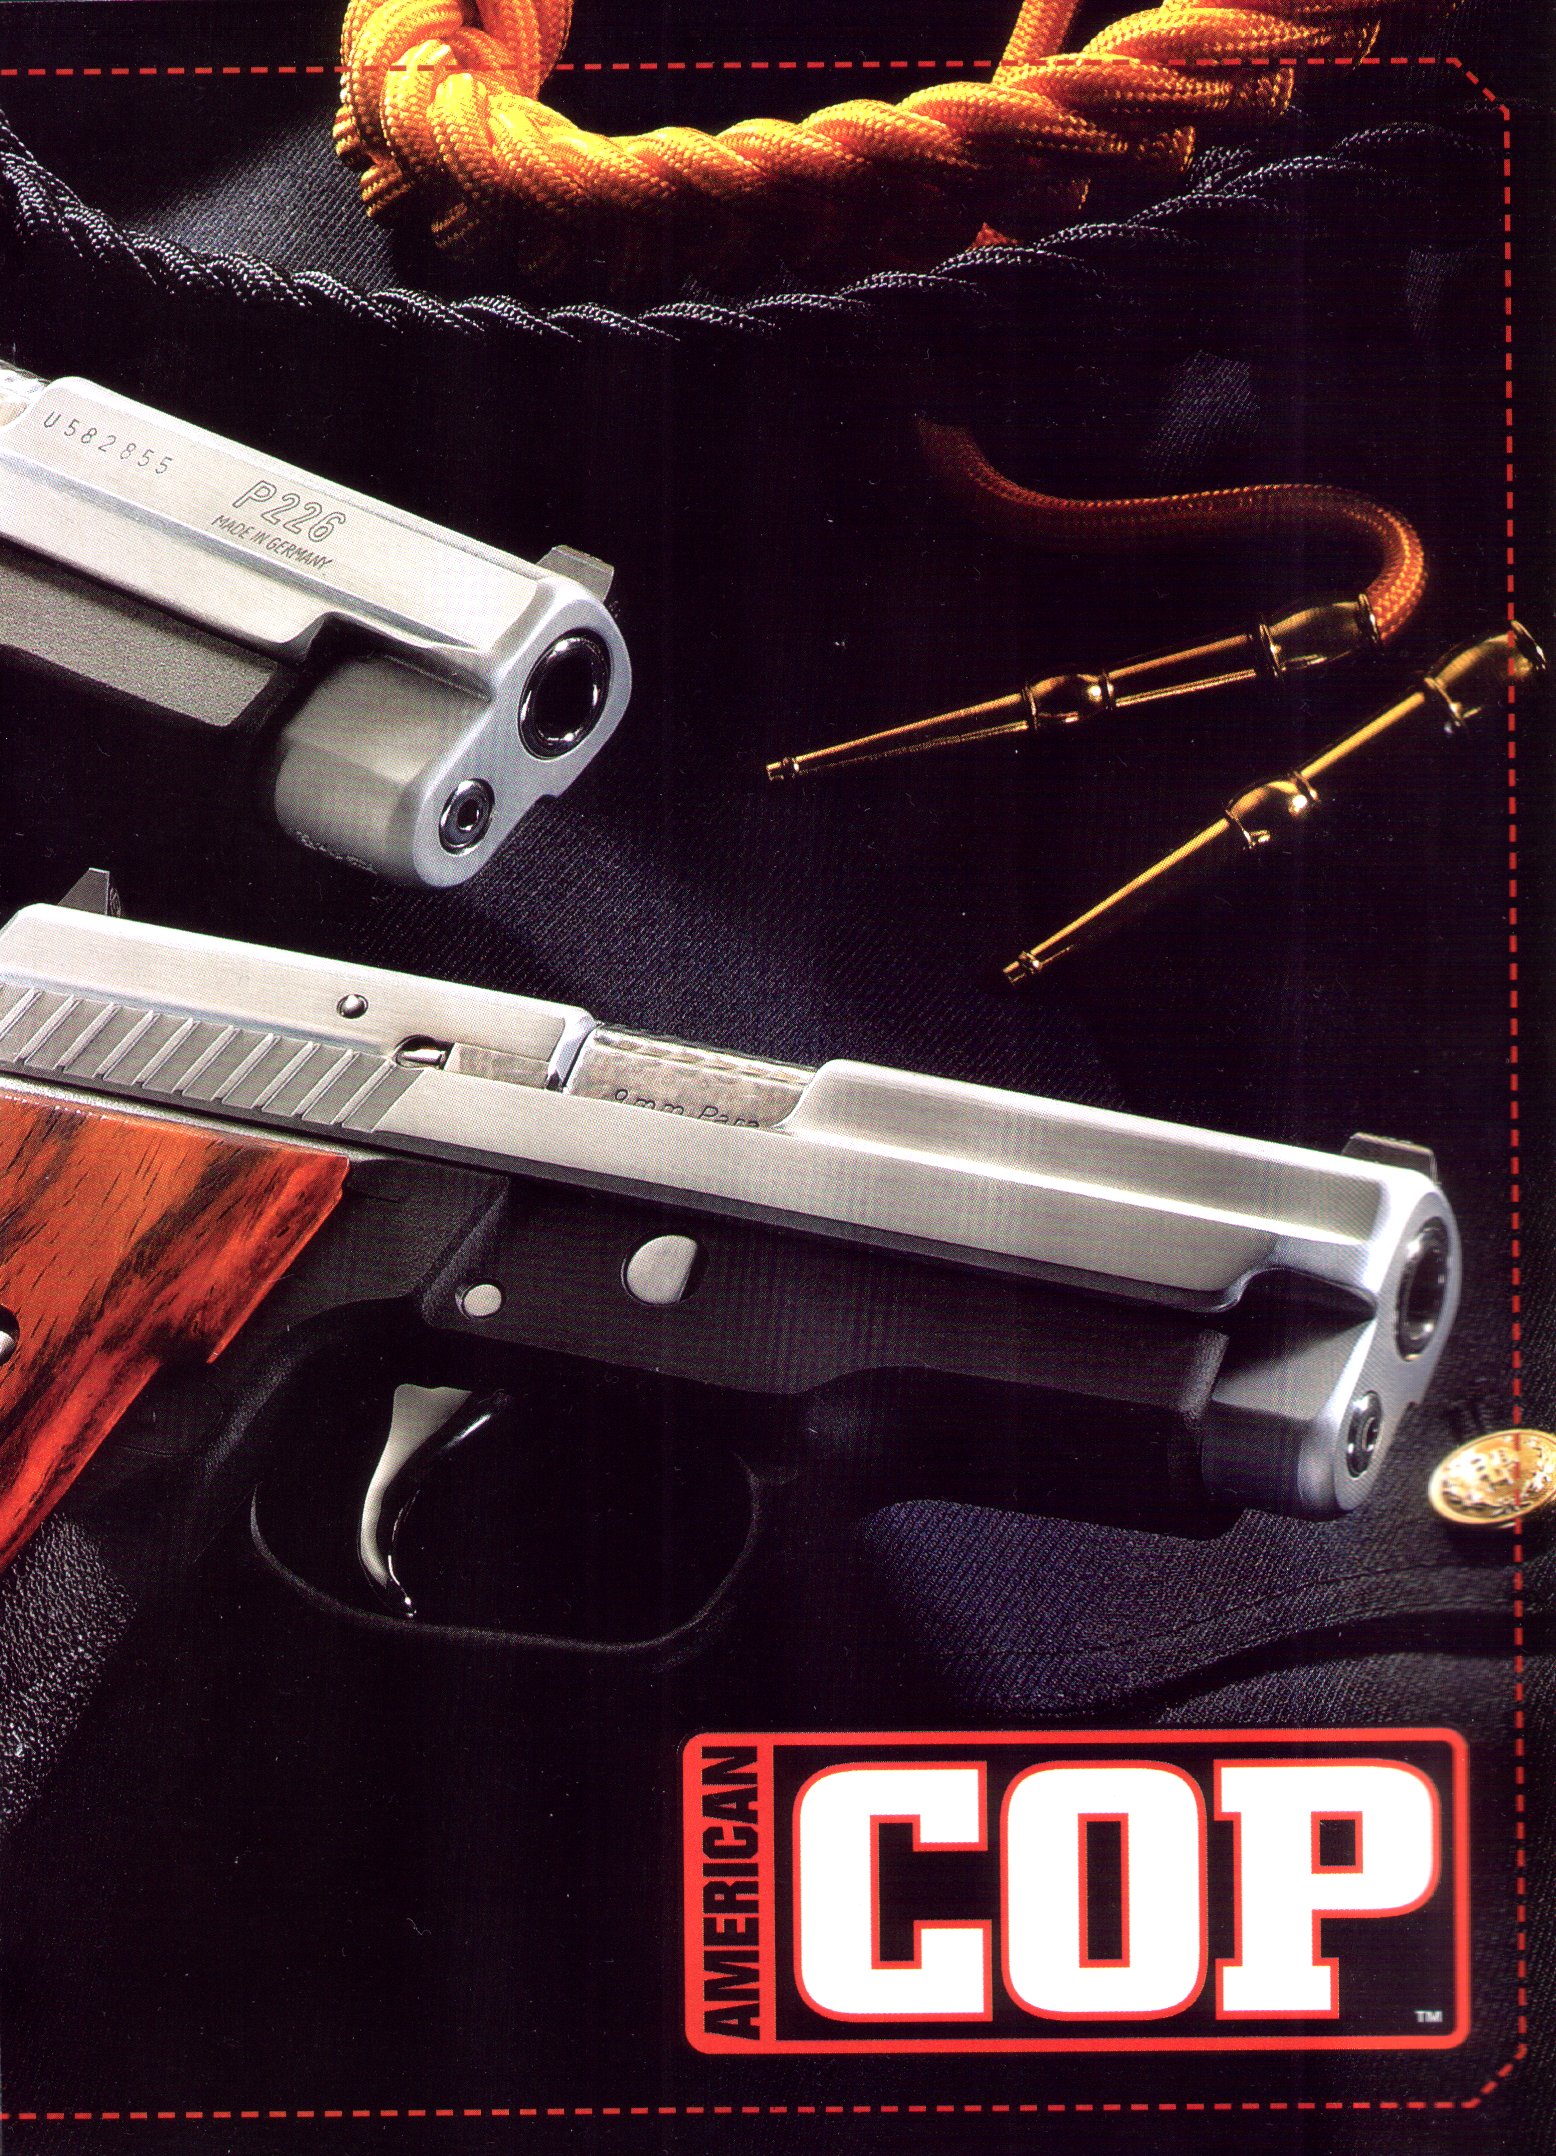 TJ's Super Sigs Featured in COP Magazine 2008 - Centerfold Right